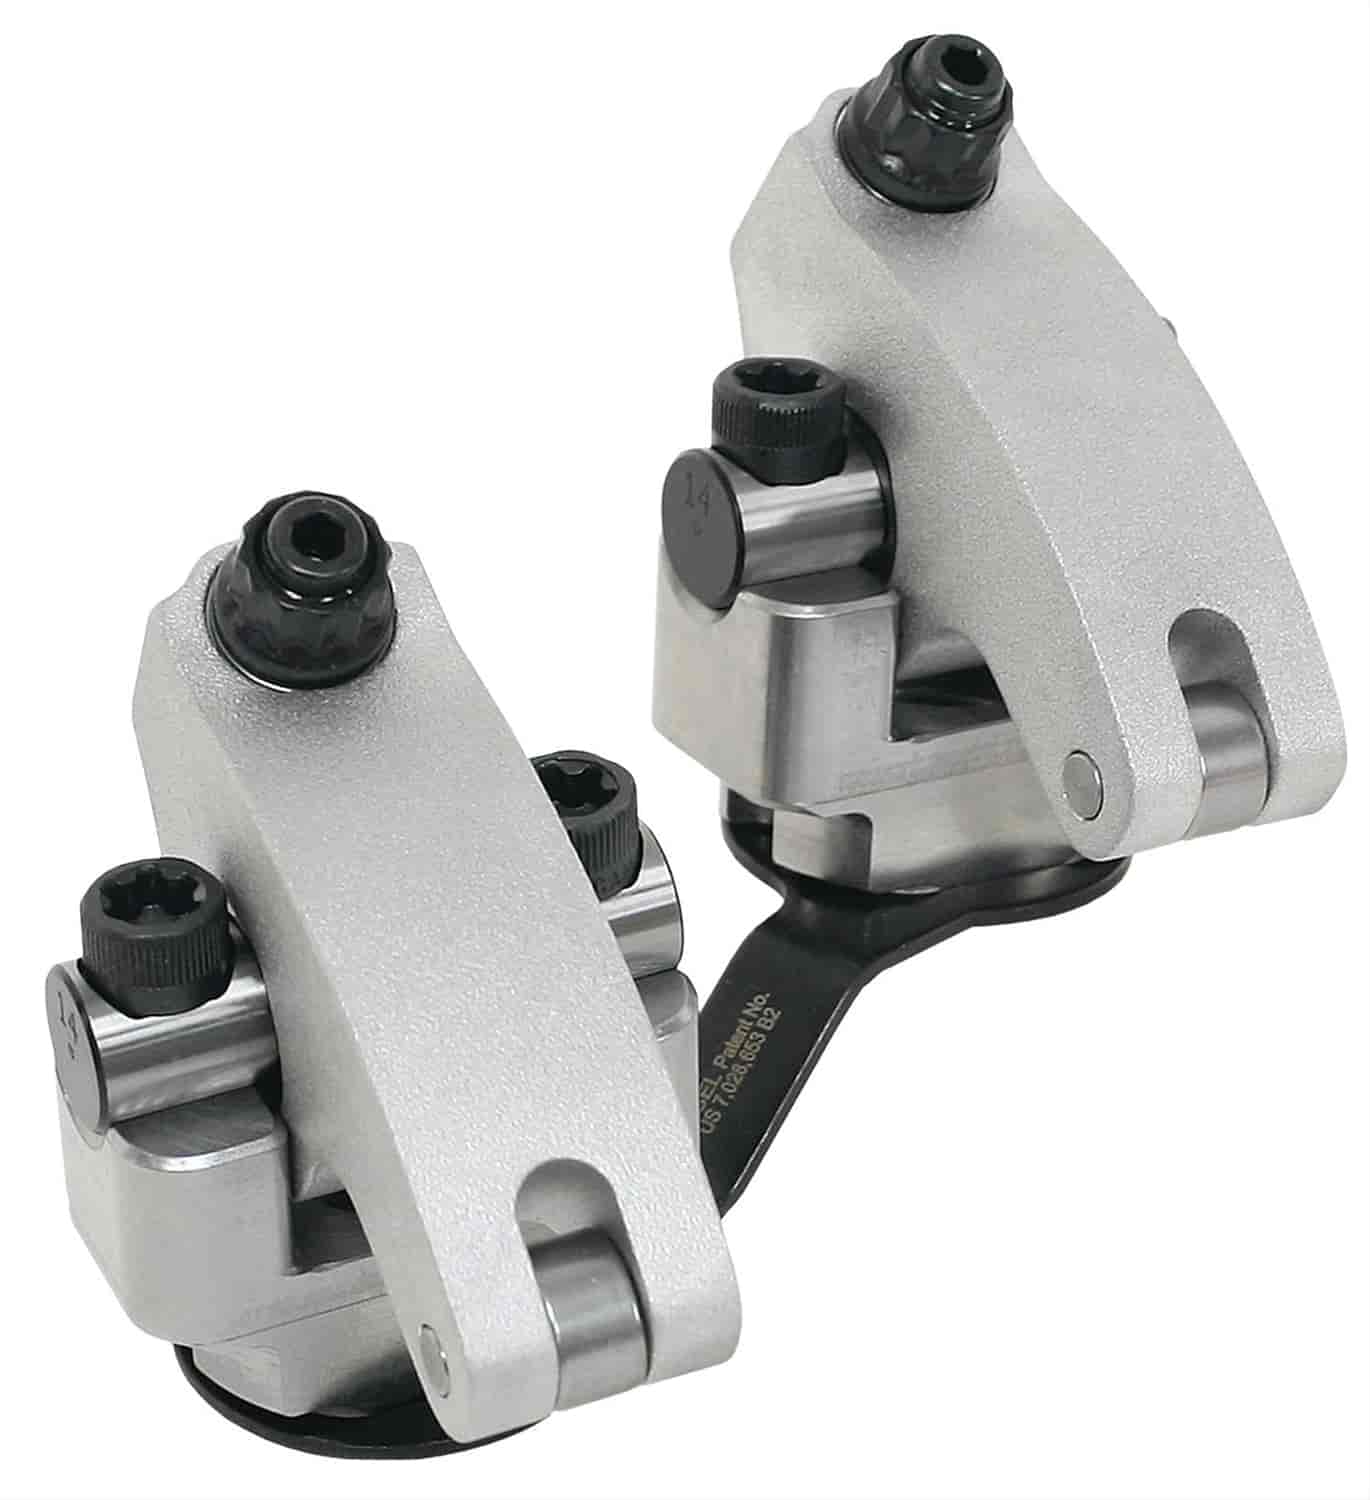 Series SS Shaft Mount Rockers Fits: World Products Merlin Oval/Cast Iron Rocker Ratio: 1.75 IN / 1.75 EX